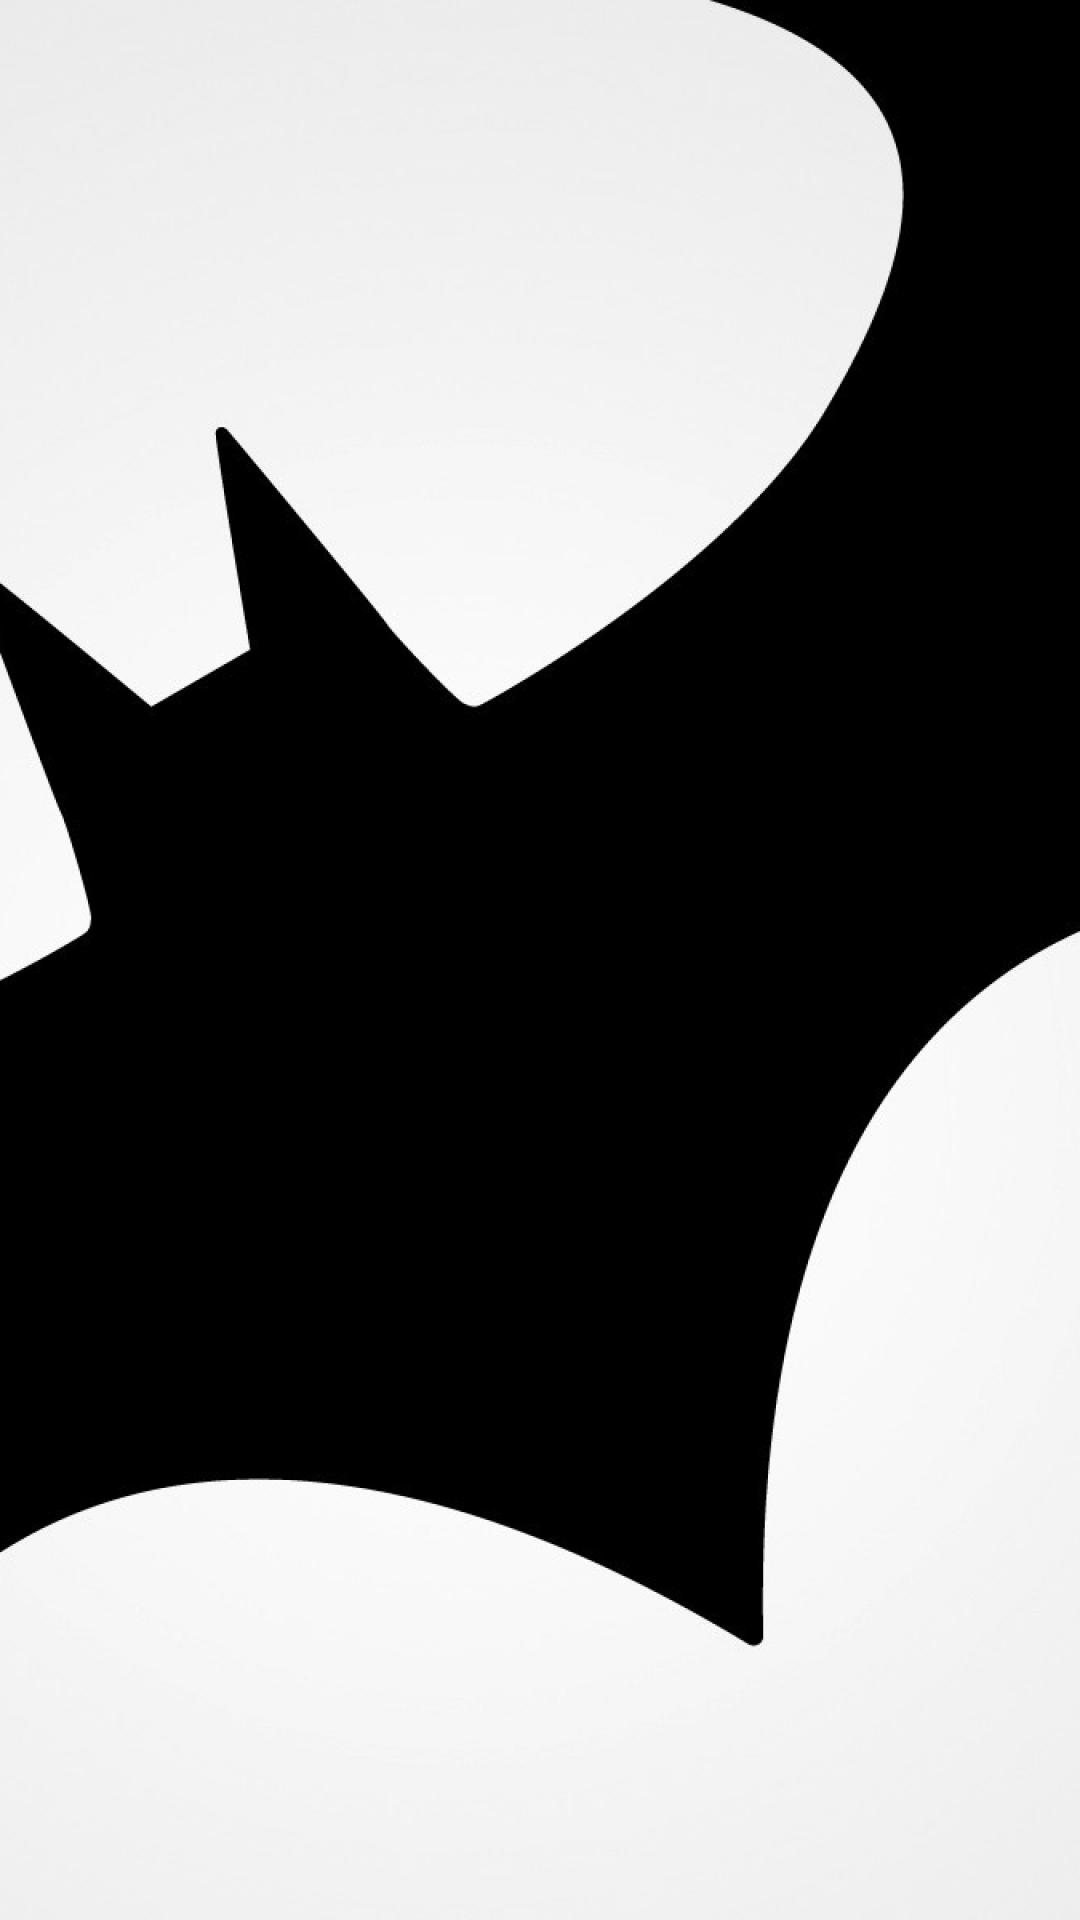 The 5 best Batman logo wallpapers for iPhone